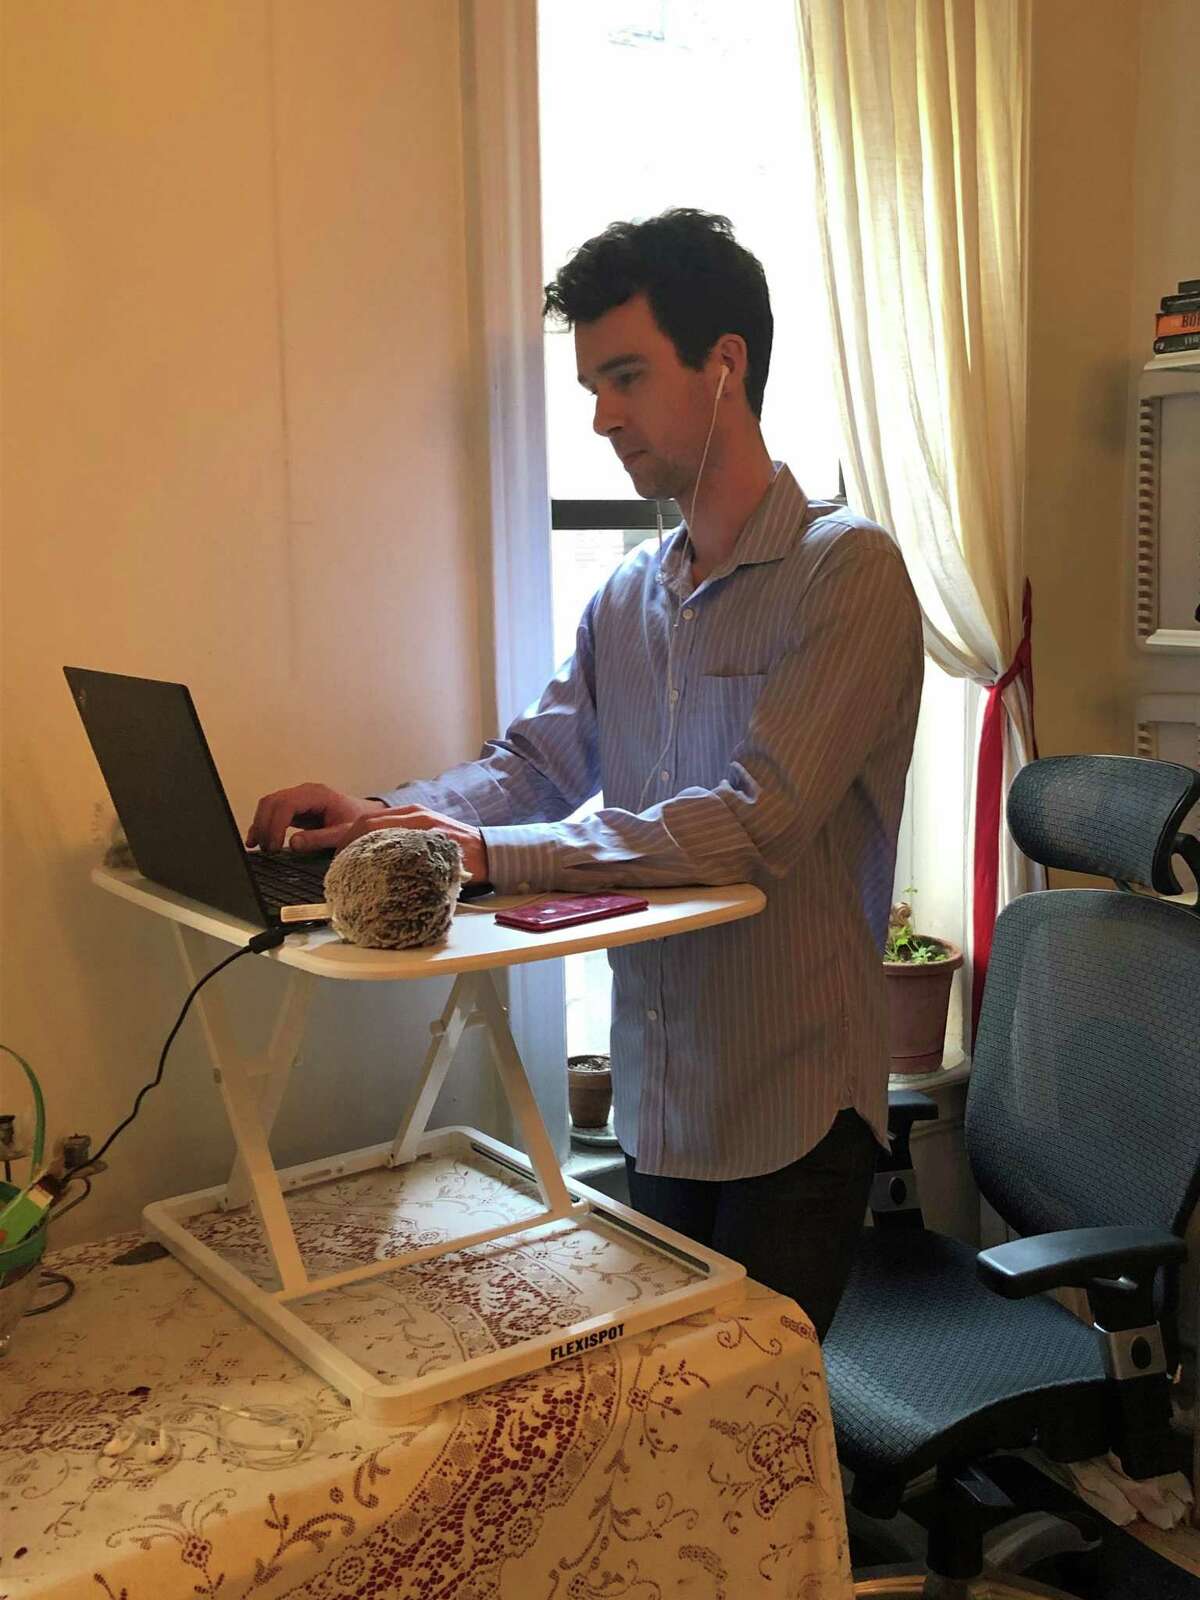 Charles-Edouard Catherine, associate director of special projects at the National Organization on Disability, is pictured at his home office in Brooklyn, N.Y. Catherine, who is blind, is using JAWS, a computer screen reader program for Microsoft Windows that allows blind and visually impaired people to read the screen, either with a text-to-speech output or by a refreshable Braille display. He said workers with disabilities are disproportionately affected by recessions.